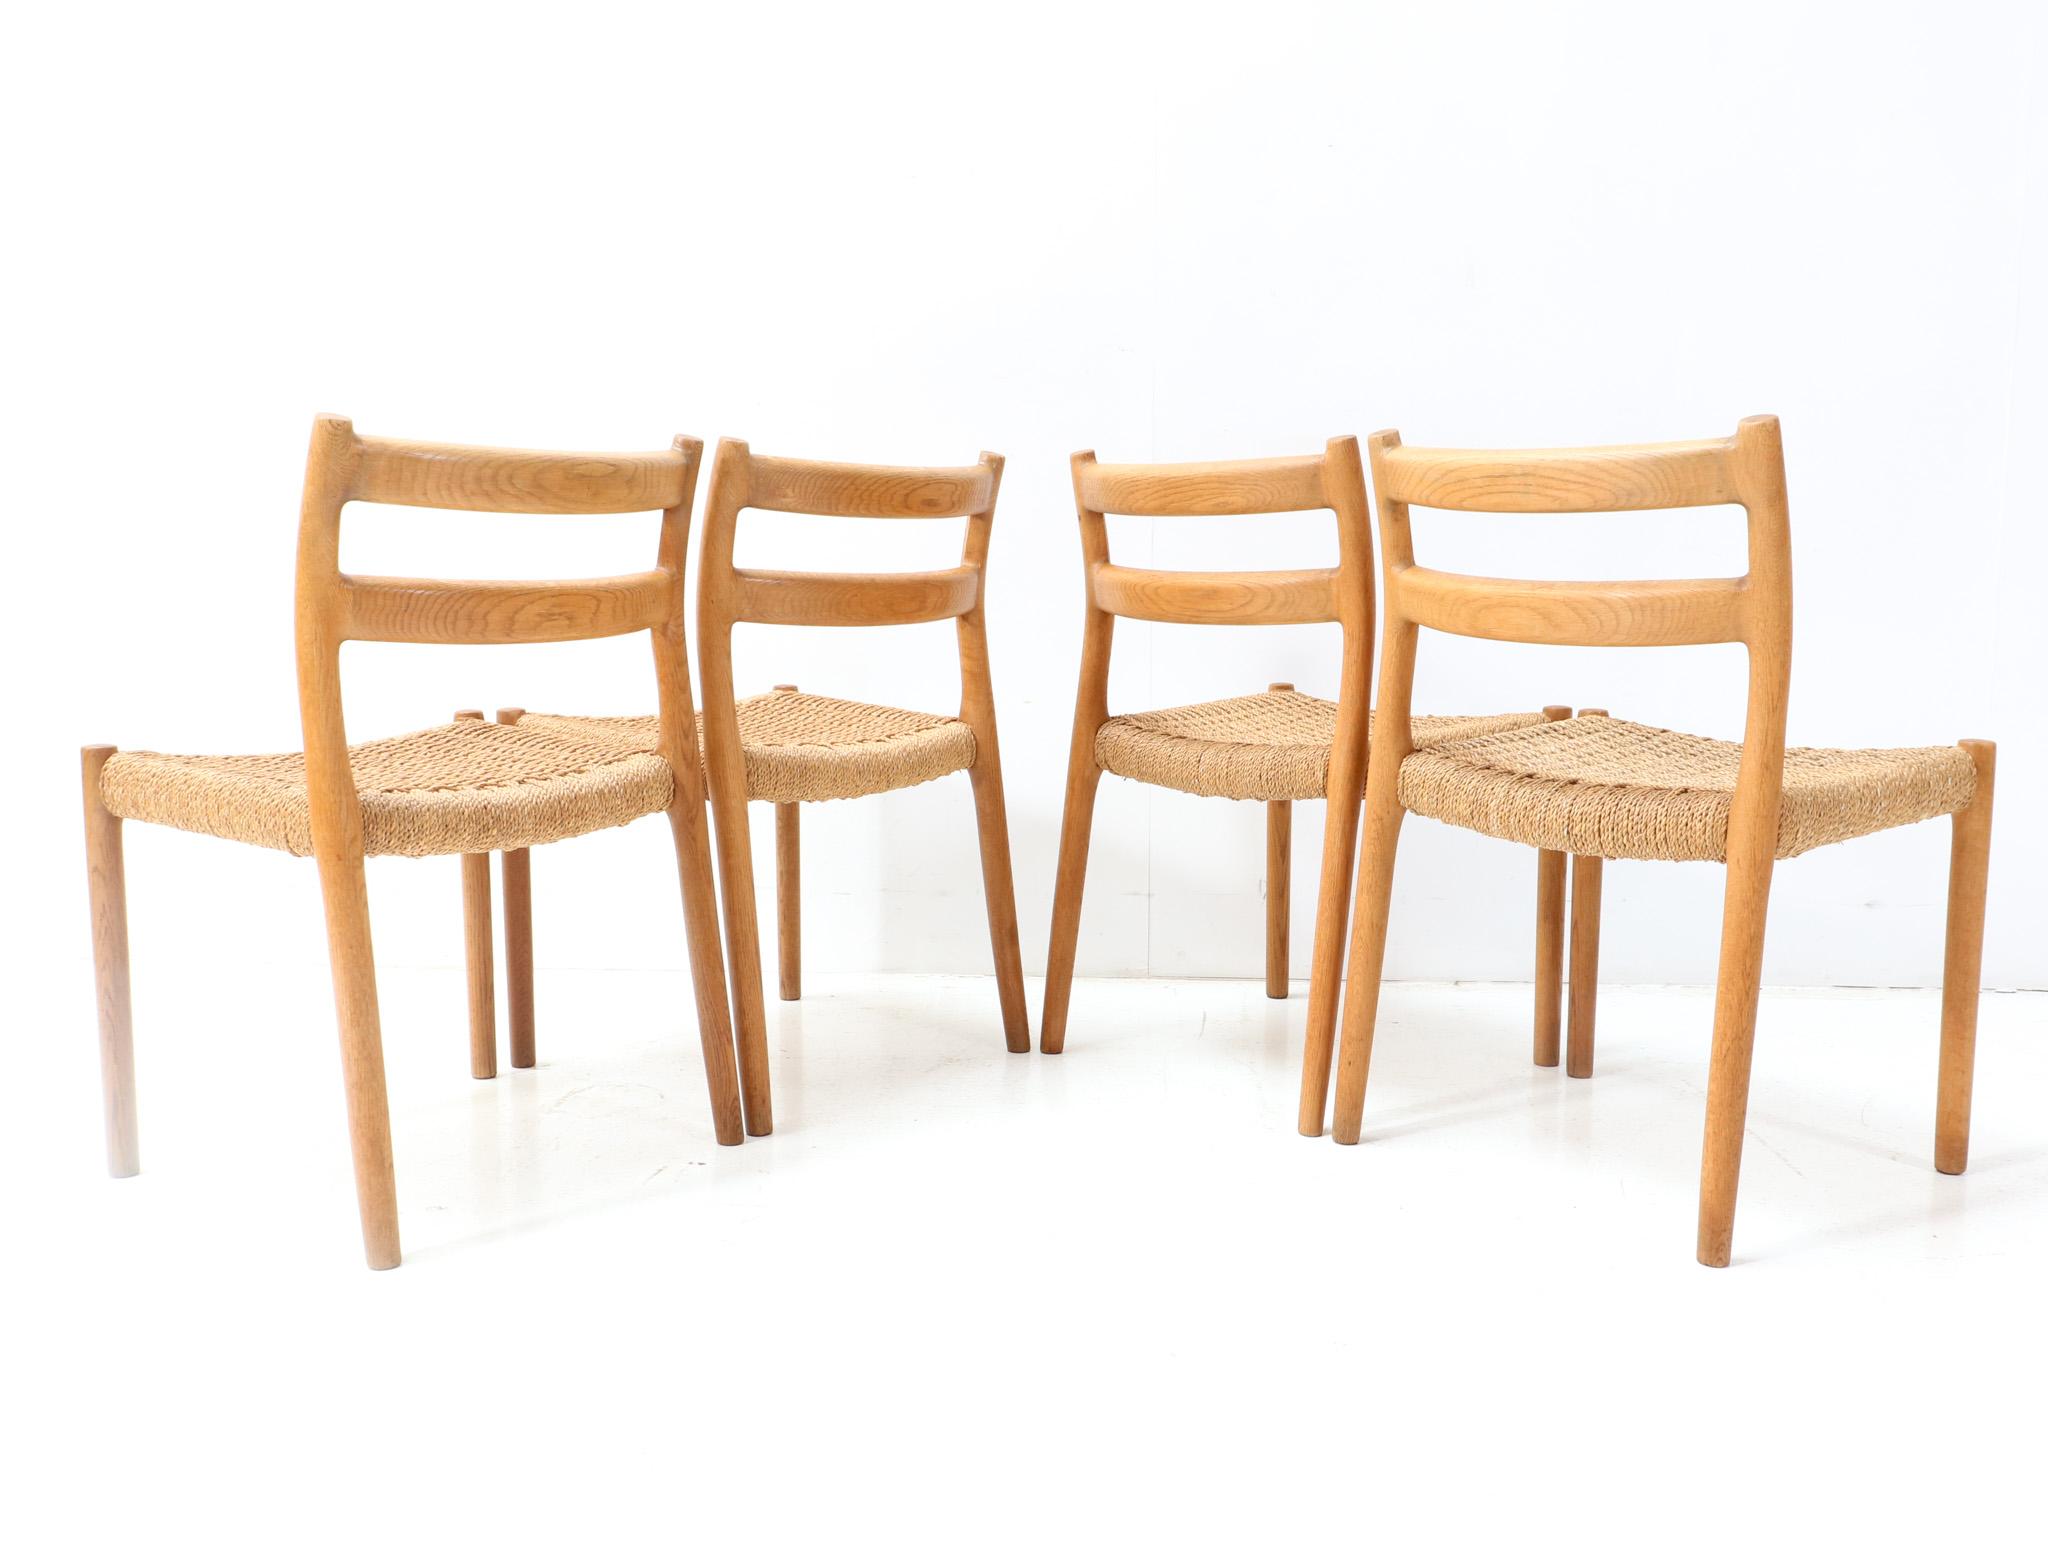 Late 20th Century Four Oak Mid-Century Modern Model 84 Dining Room Chairs by Niels Otto Møller